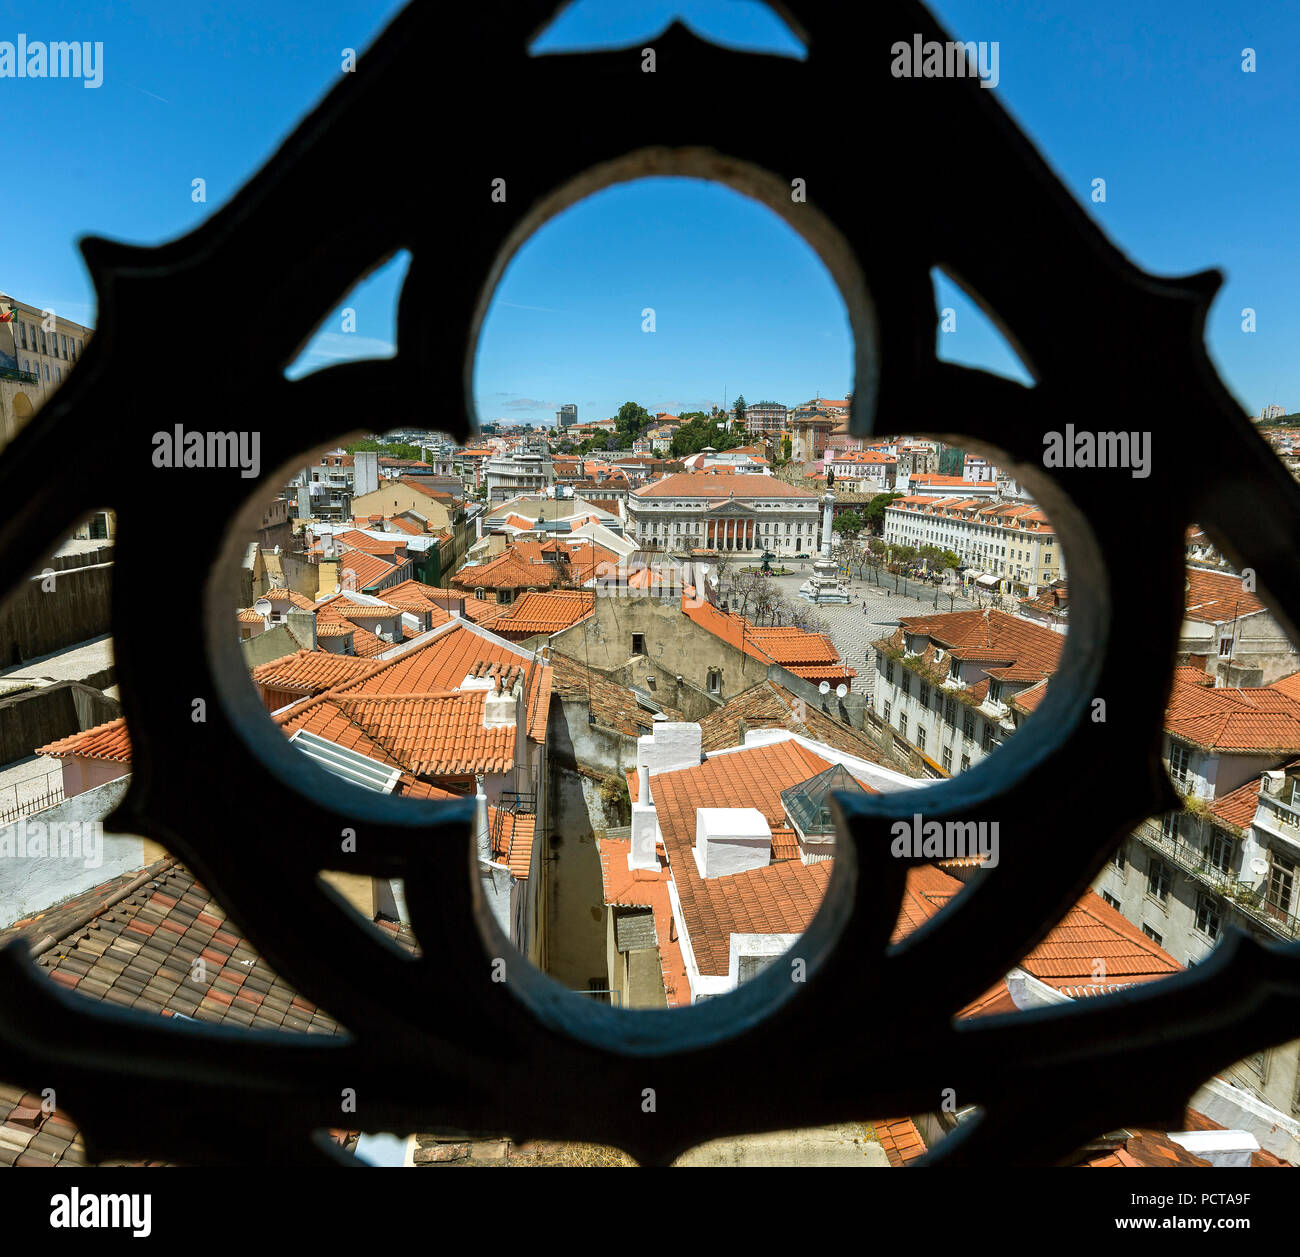 View through wrought iron grille from the most famous elevator in Portugal Elevador do Município or Elevador da Biblioteca and Elevador de S. Julião on the old town of Portugal with the red roofs, Lisbon, District of Lisbon, Portugal, Europe Stock Photo